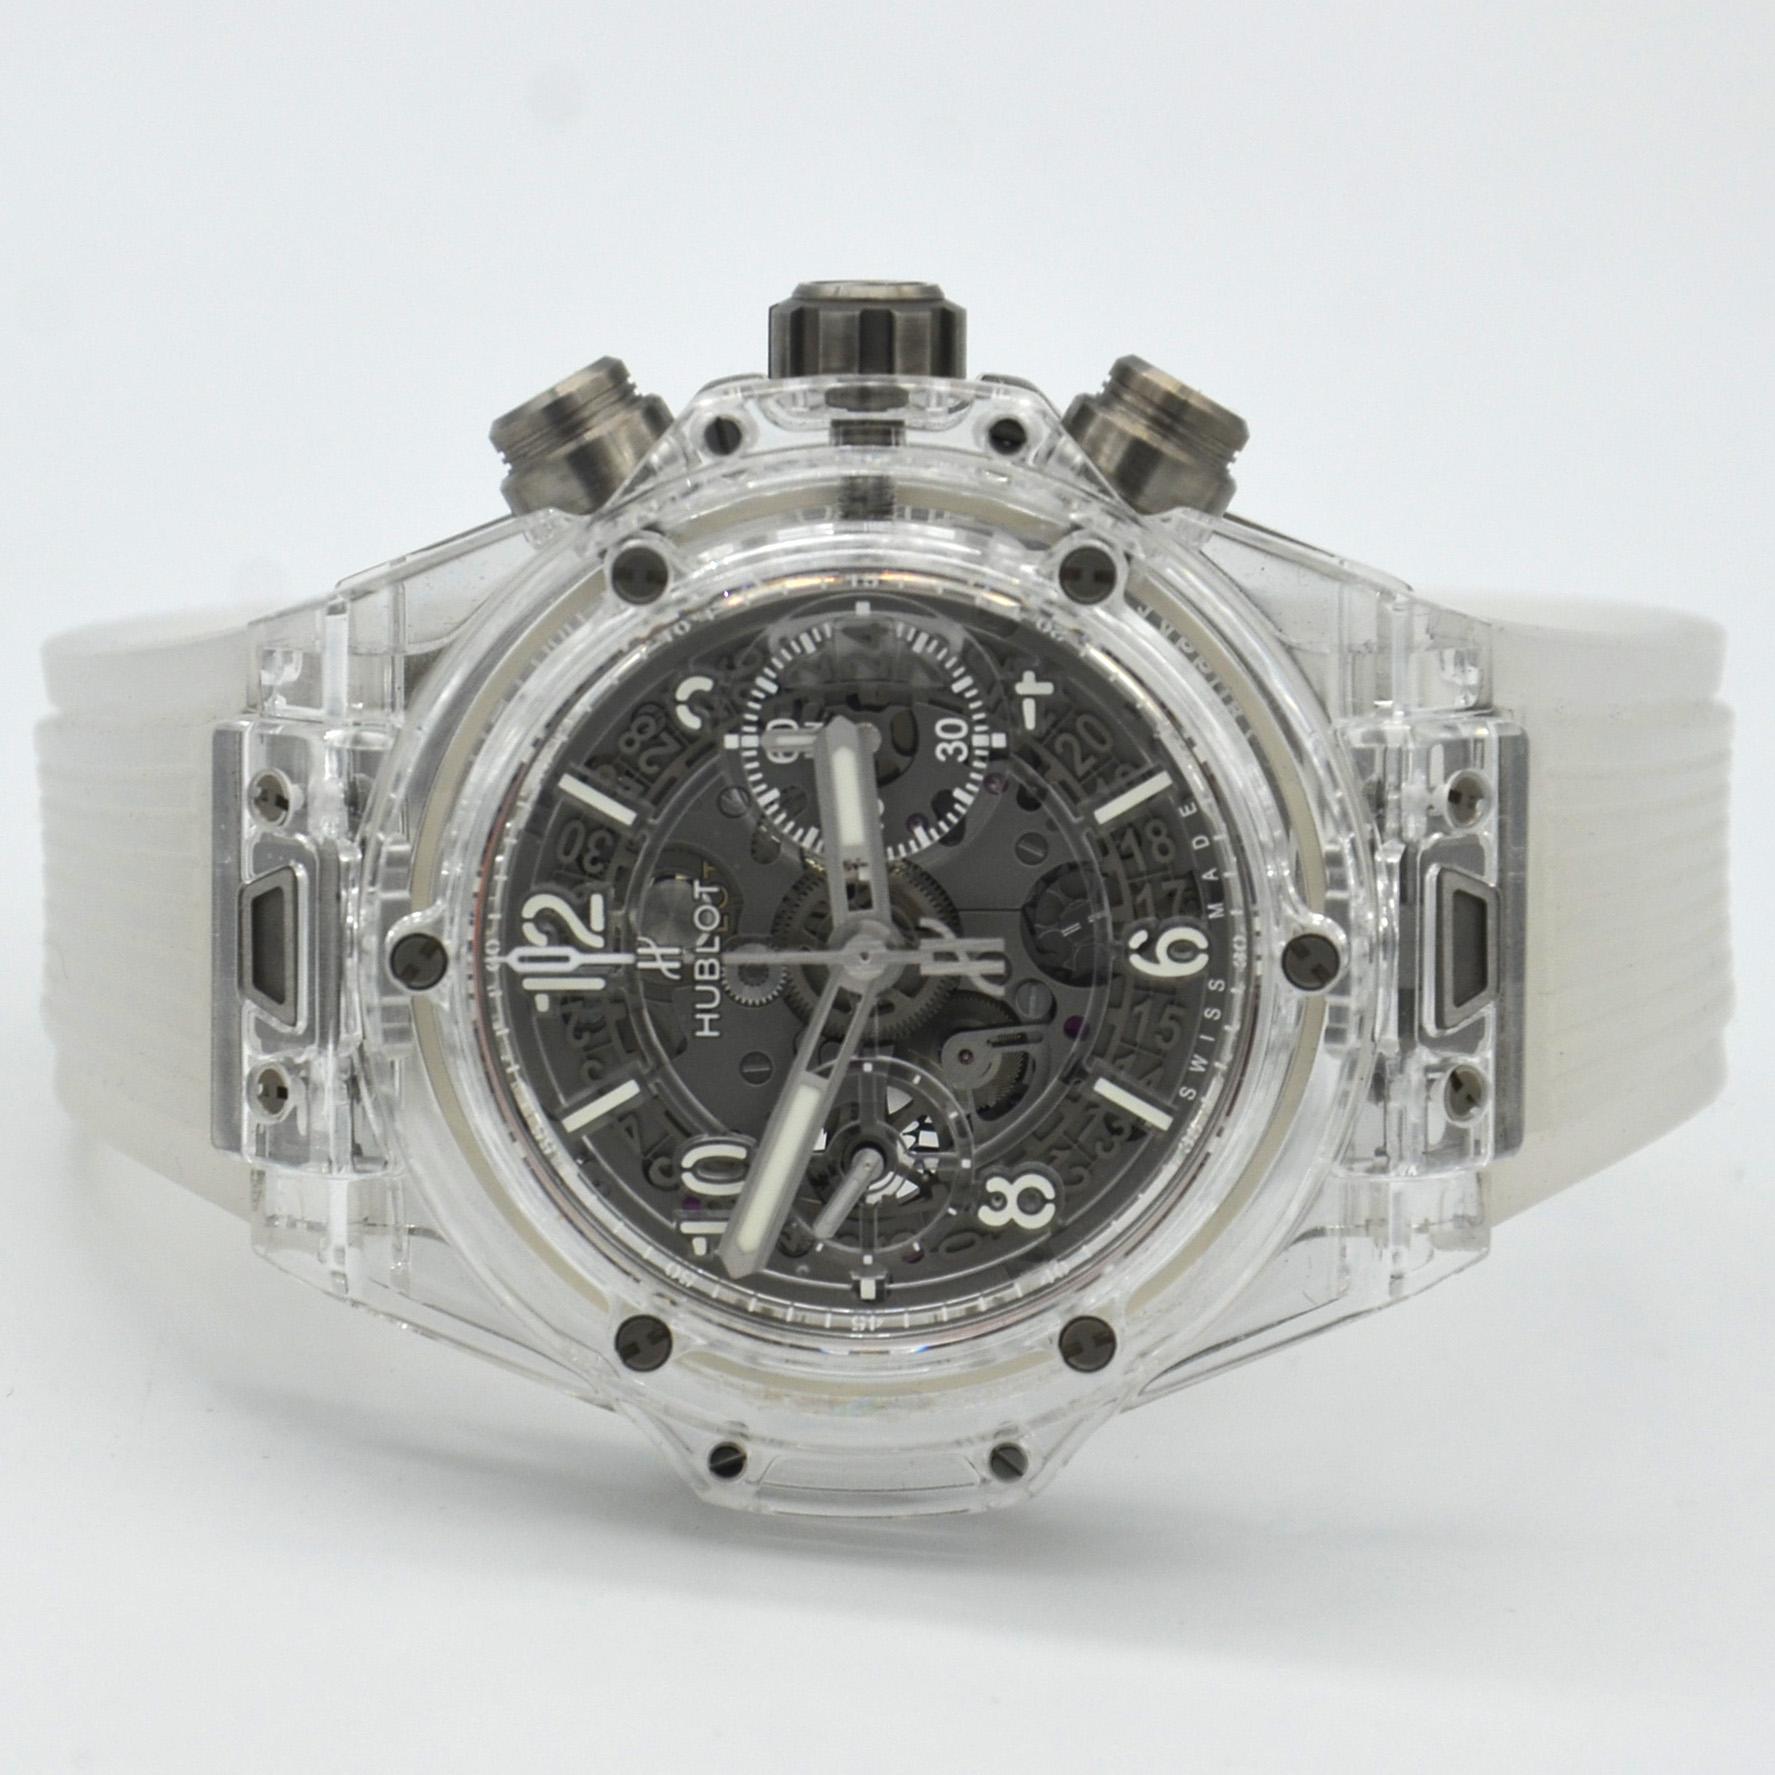 Certified Authentic Hublot Big Bang Unico, Reference Number: 441.JX.4802.RT. The watch has a 42mm Polished Transparent Composite Resin Skeleton Dial featuring HUB1280 UNICO Manufacture Self-winding Chronograph Flyback Movement with Column Wheel. The